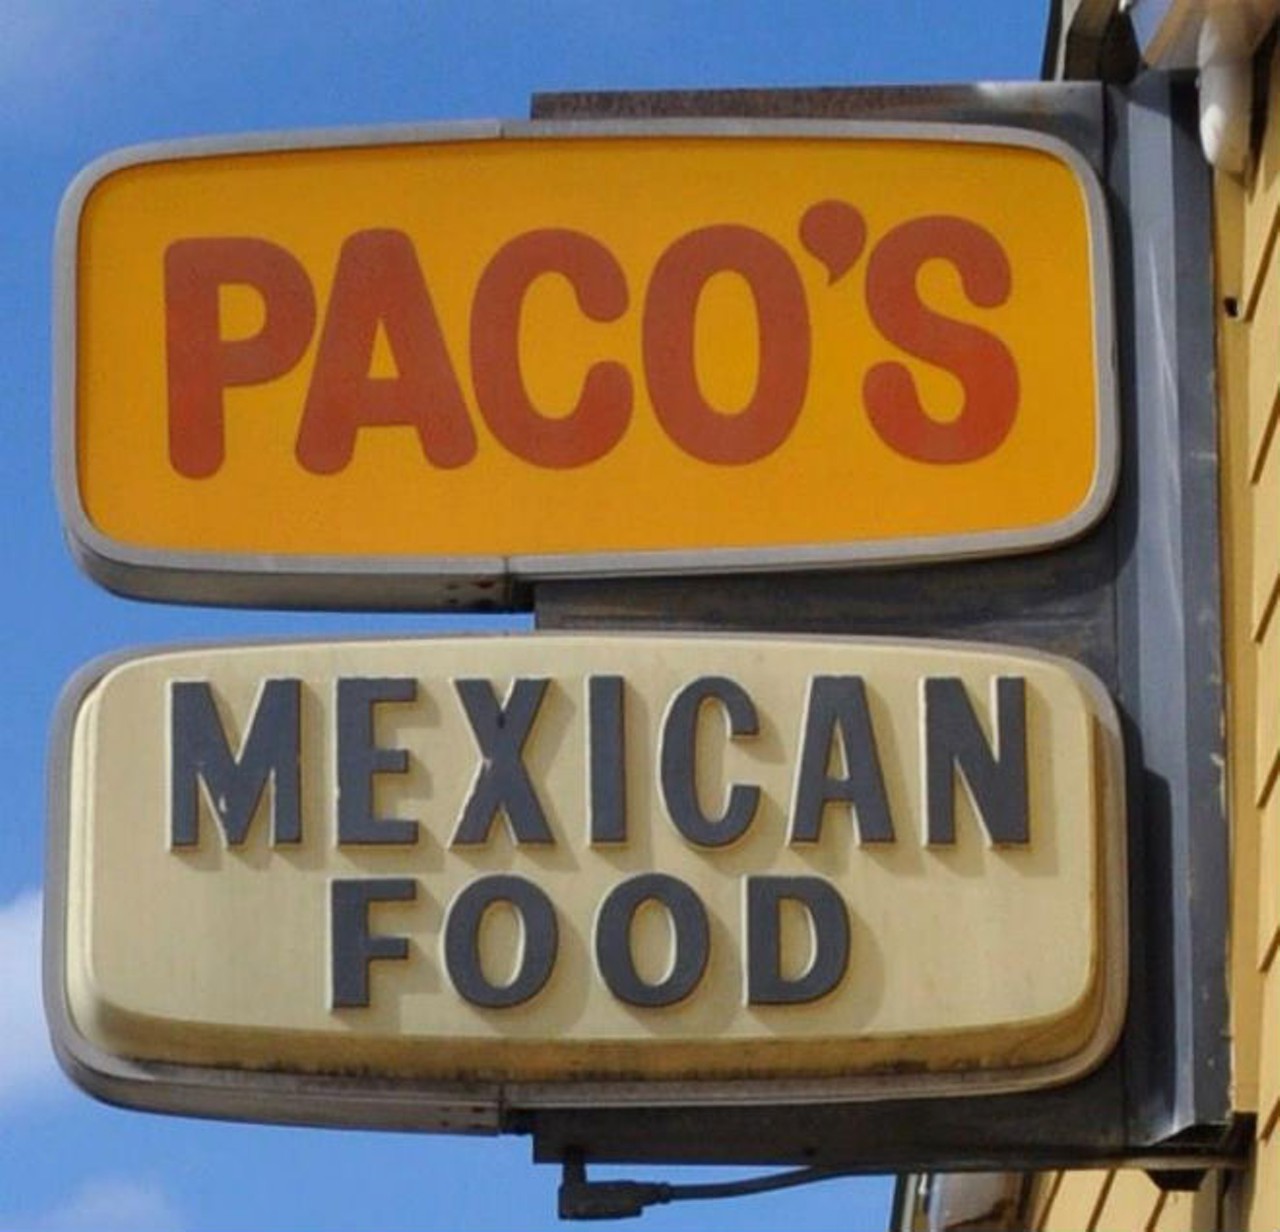 Another restuarant for those of you who prefer nachos to margaritas, Paco's claims to have the best queso in town.
via